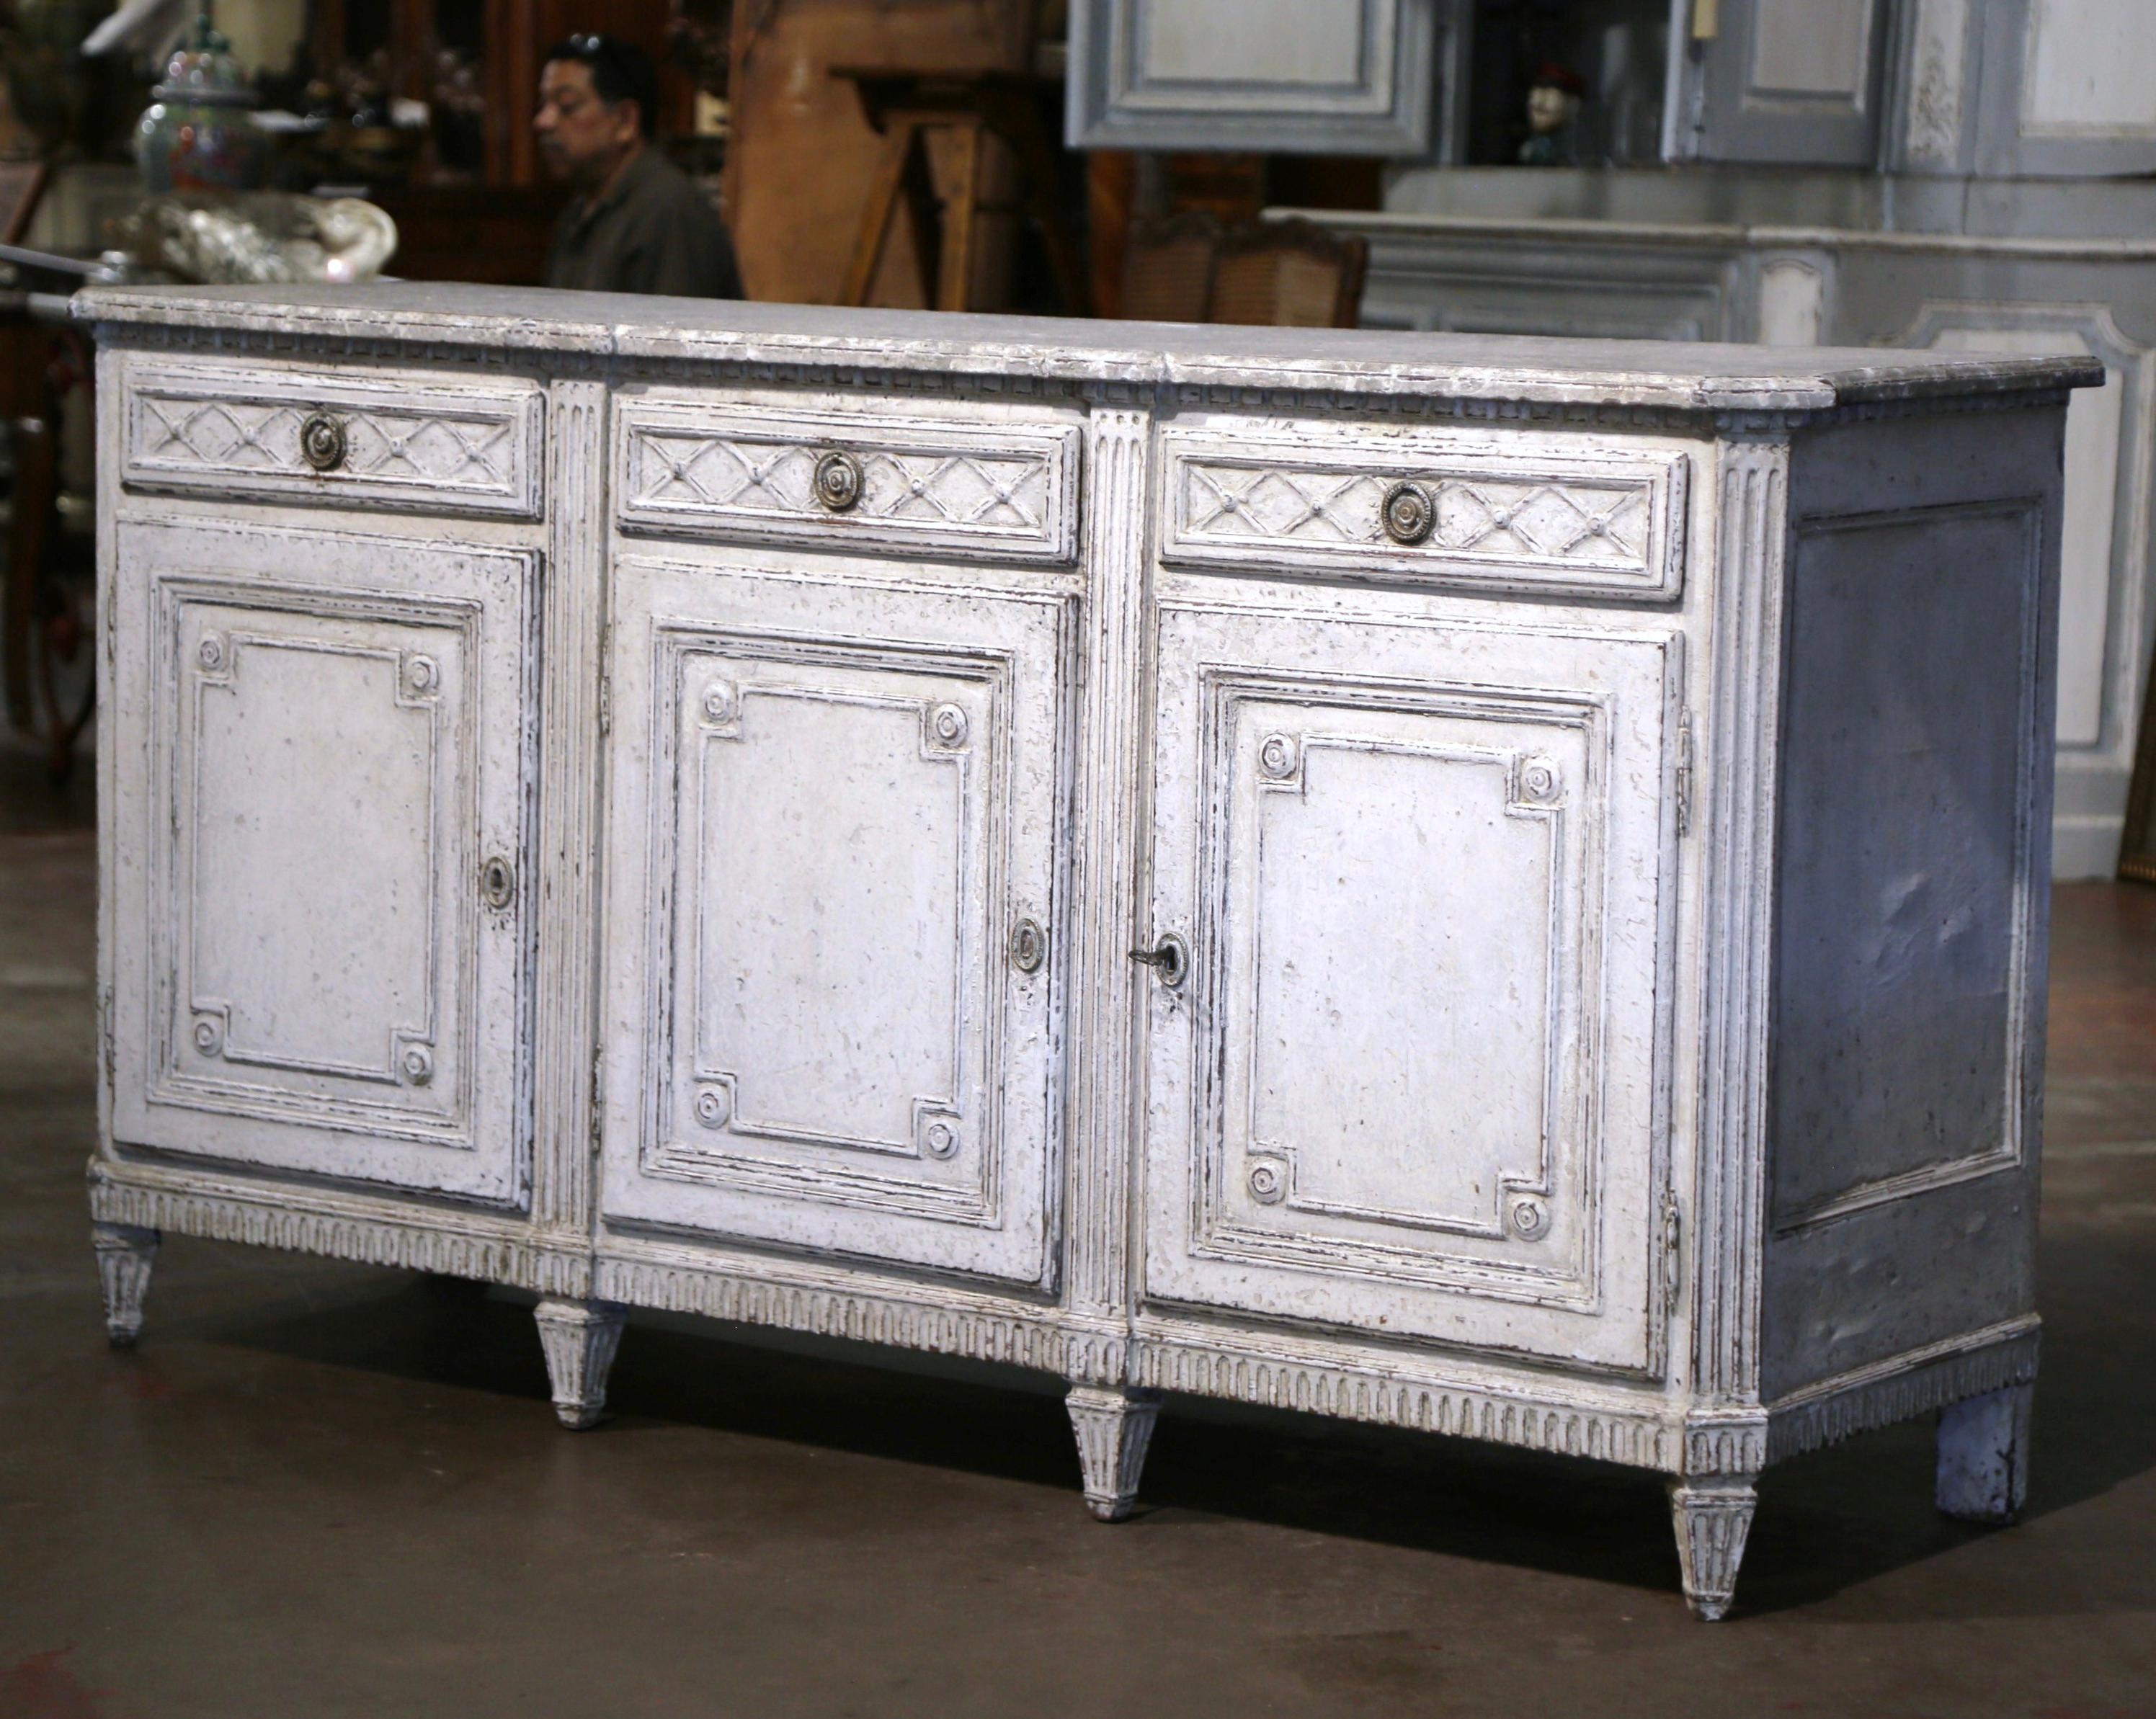 Crafted in France circa 1870, the antique grey painted sideboard stands on eight turned and tapered legs over a straight and carved plinth apron. The traditional enfilade features three doors across the front; each door with inset panel, is